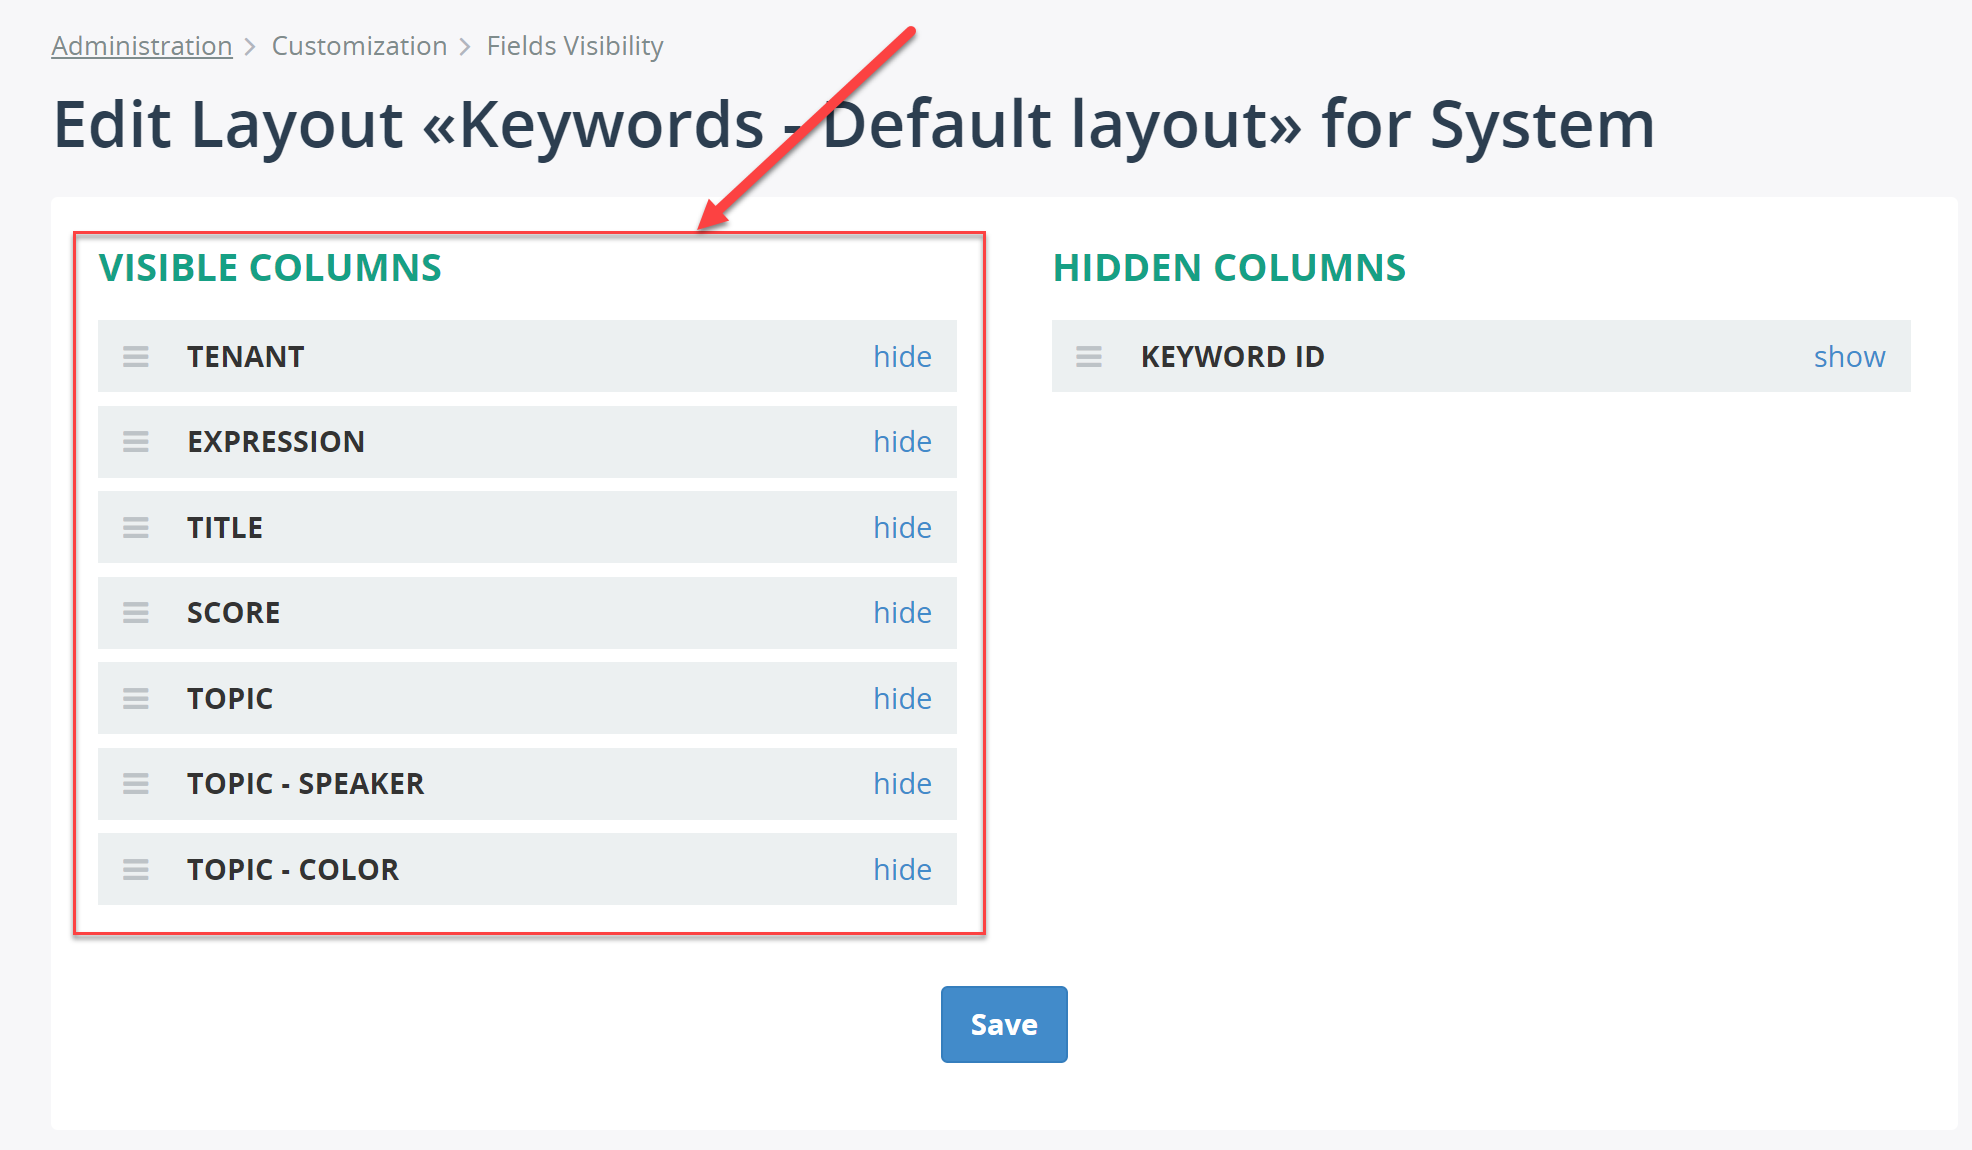 Add configuration of Field Visibility for Keywords page